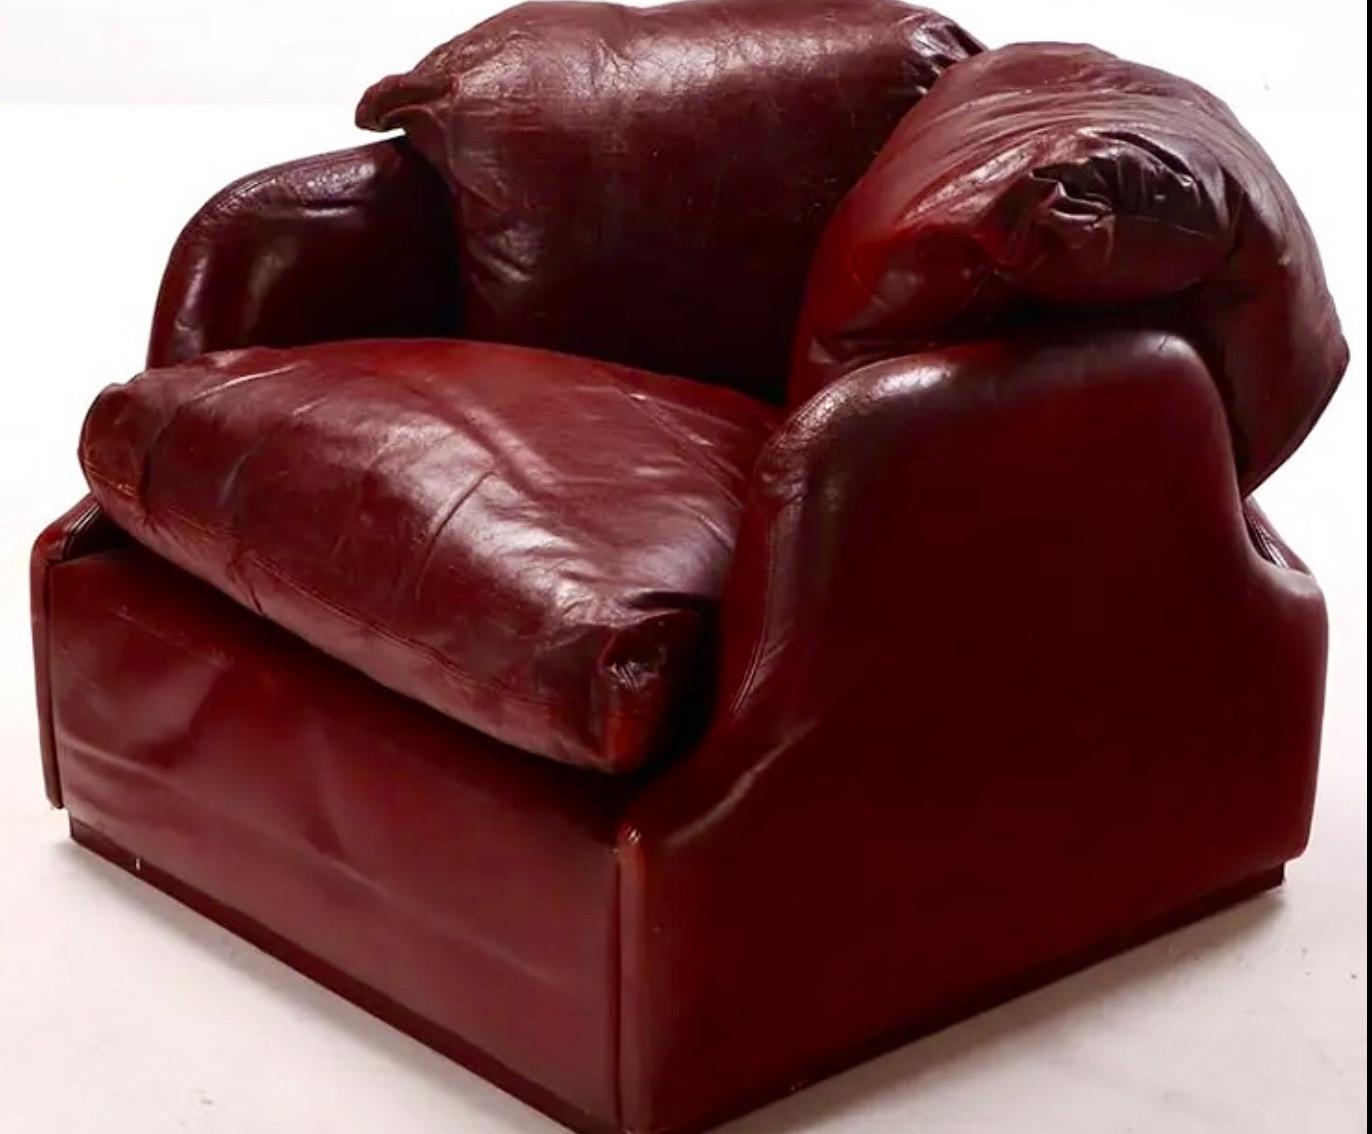 Confidential Lounge Chair, Cordovan Leather, Alberto Rosselli for Saporiti Italy, 1972.

Original leather appears to have the shine, feel and variation in deep oxblood color that is typical of cordovan.

The Confidential Collection is one of the